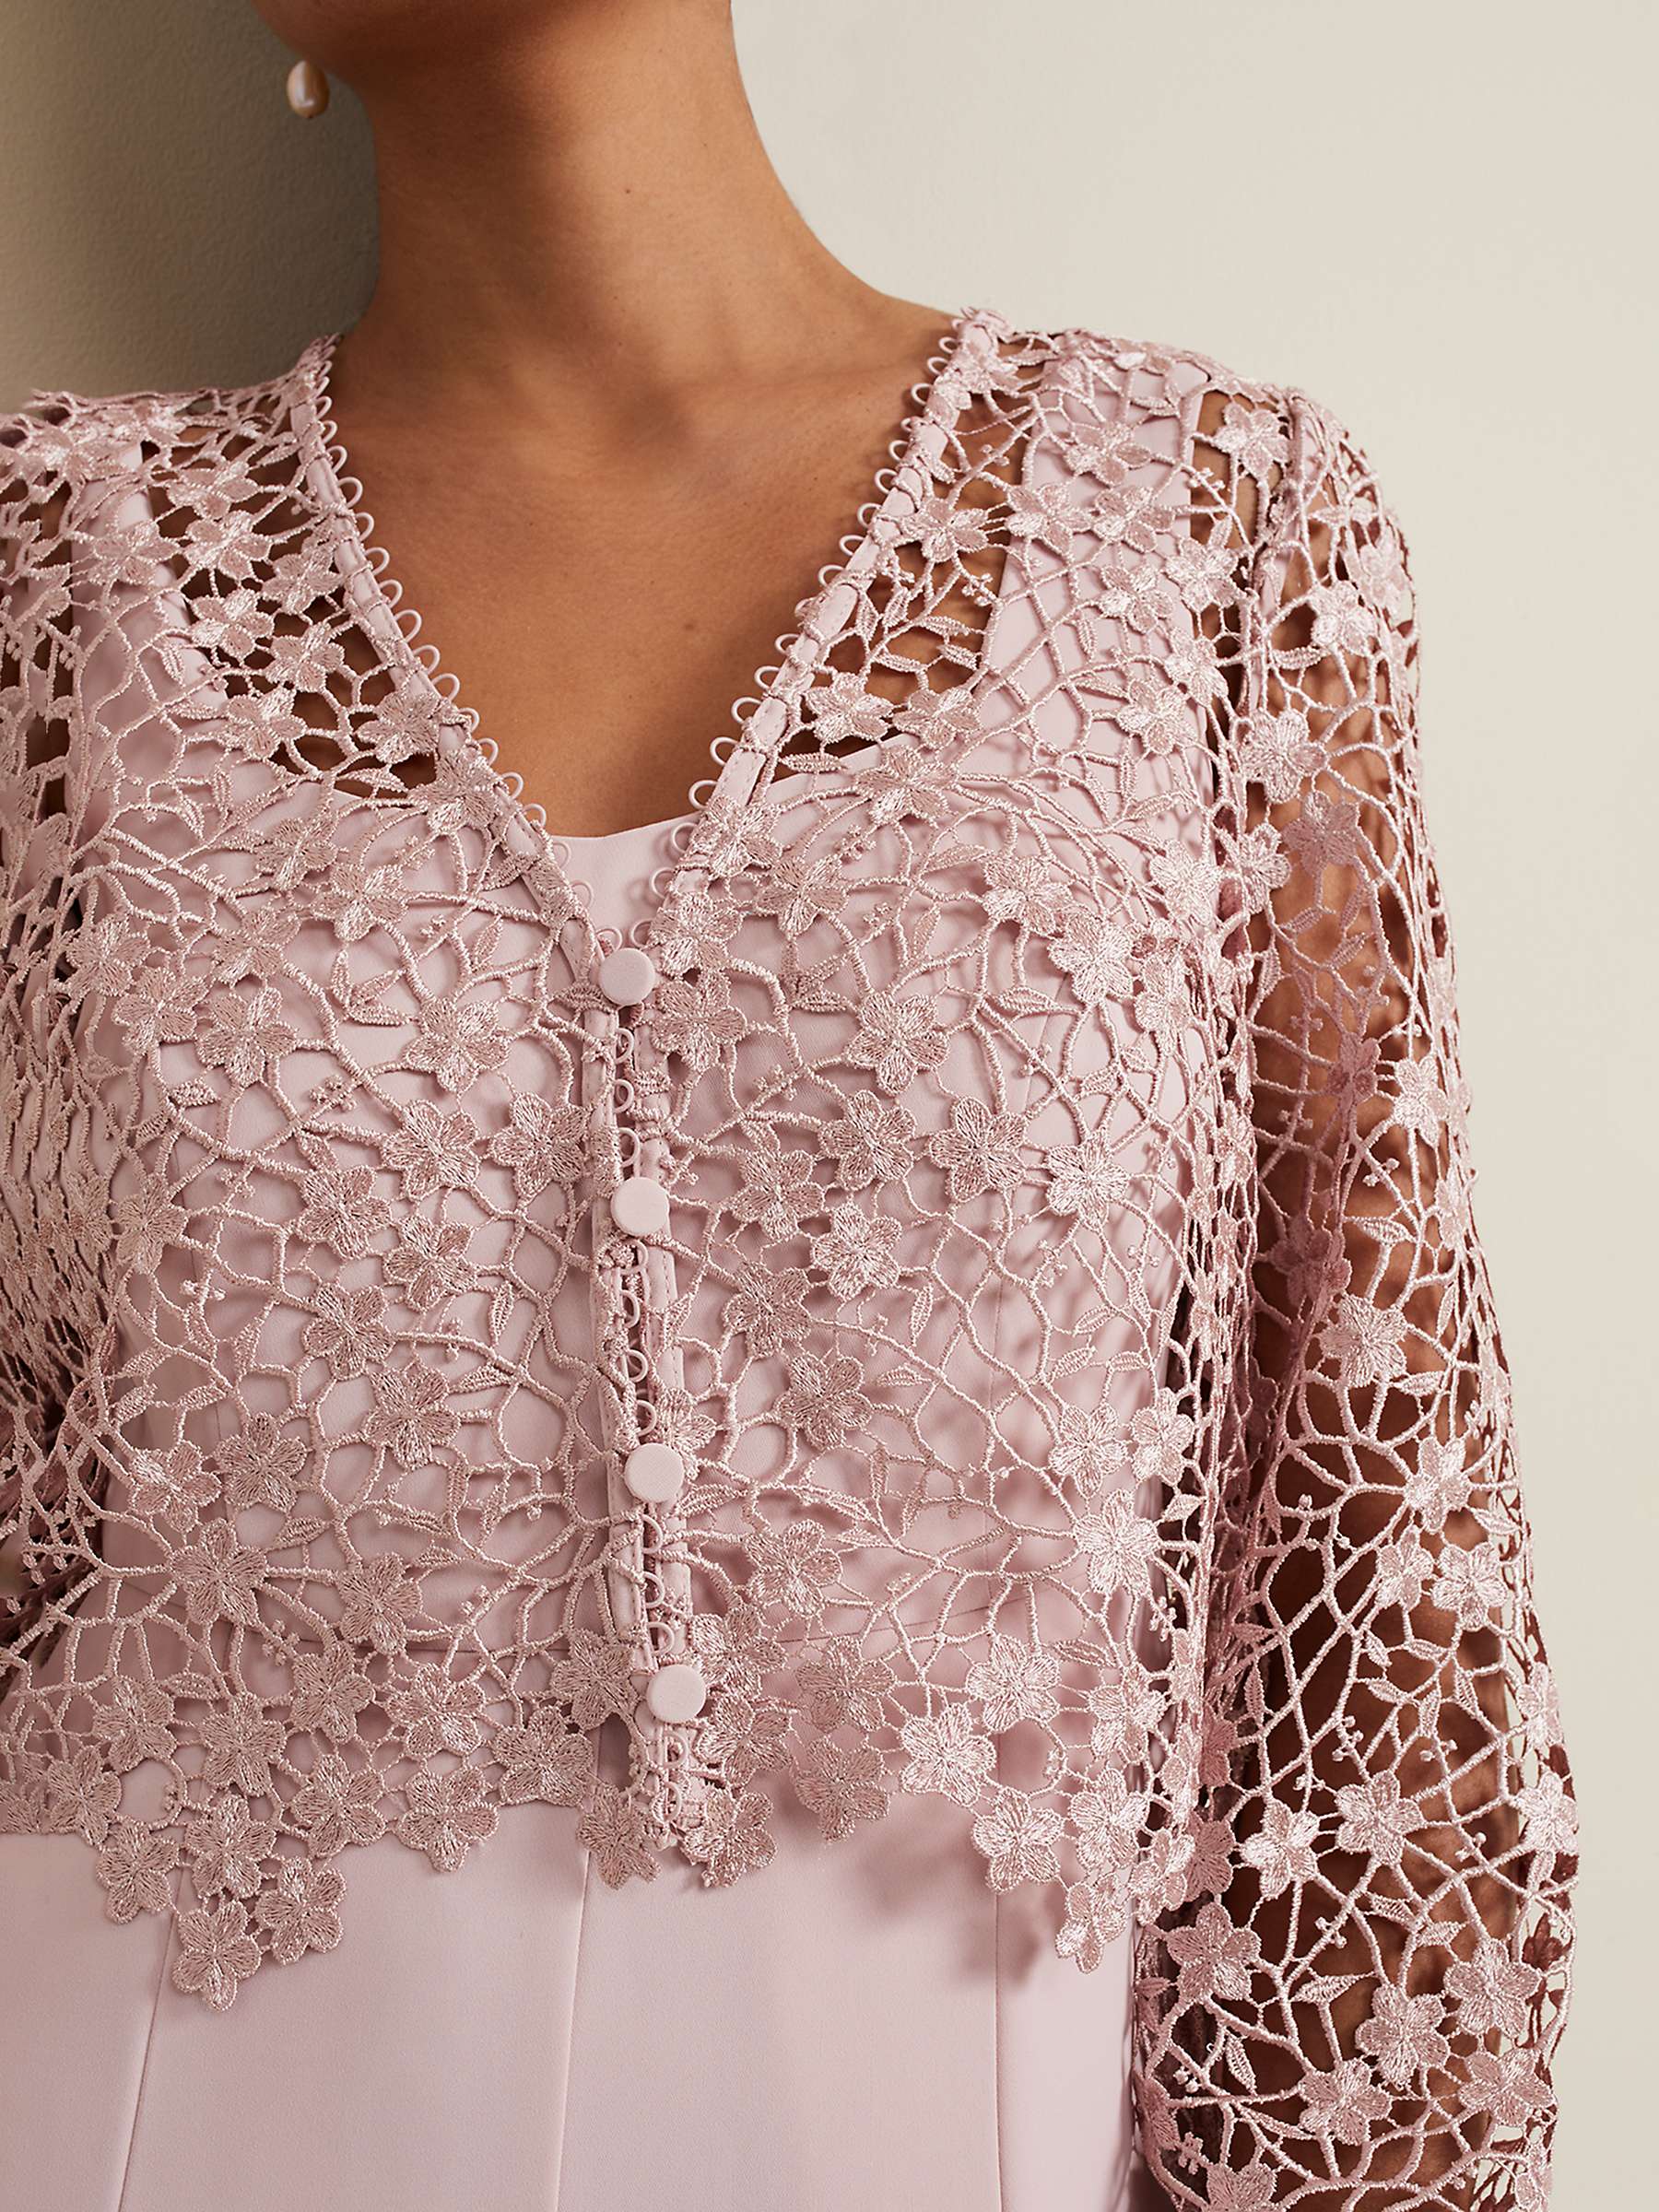 Buy Phase Eight Petite Mariposa Lace Overlay Jumpsuit, Pale Pink Online at johnlewis.com